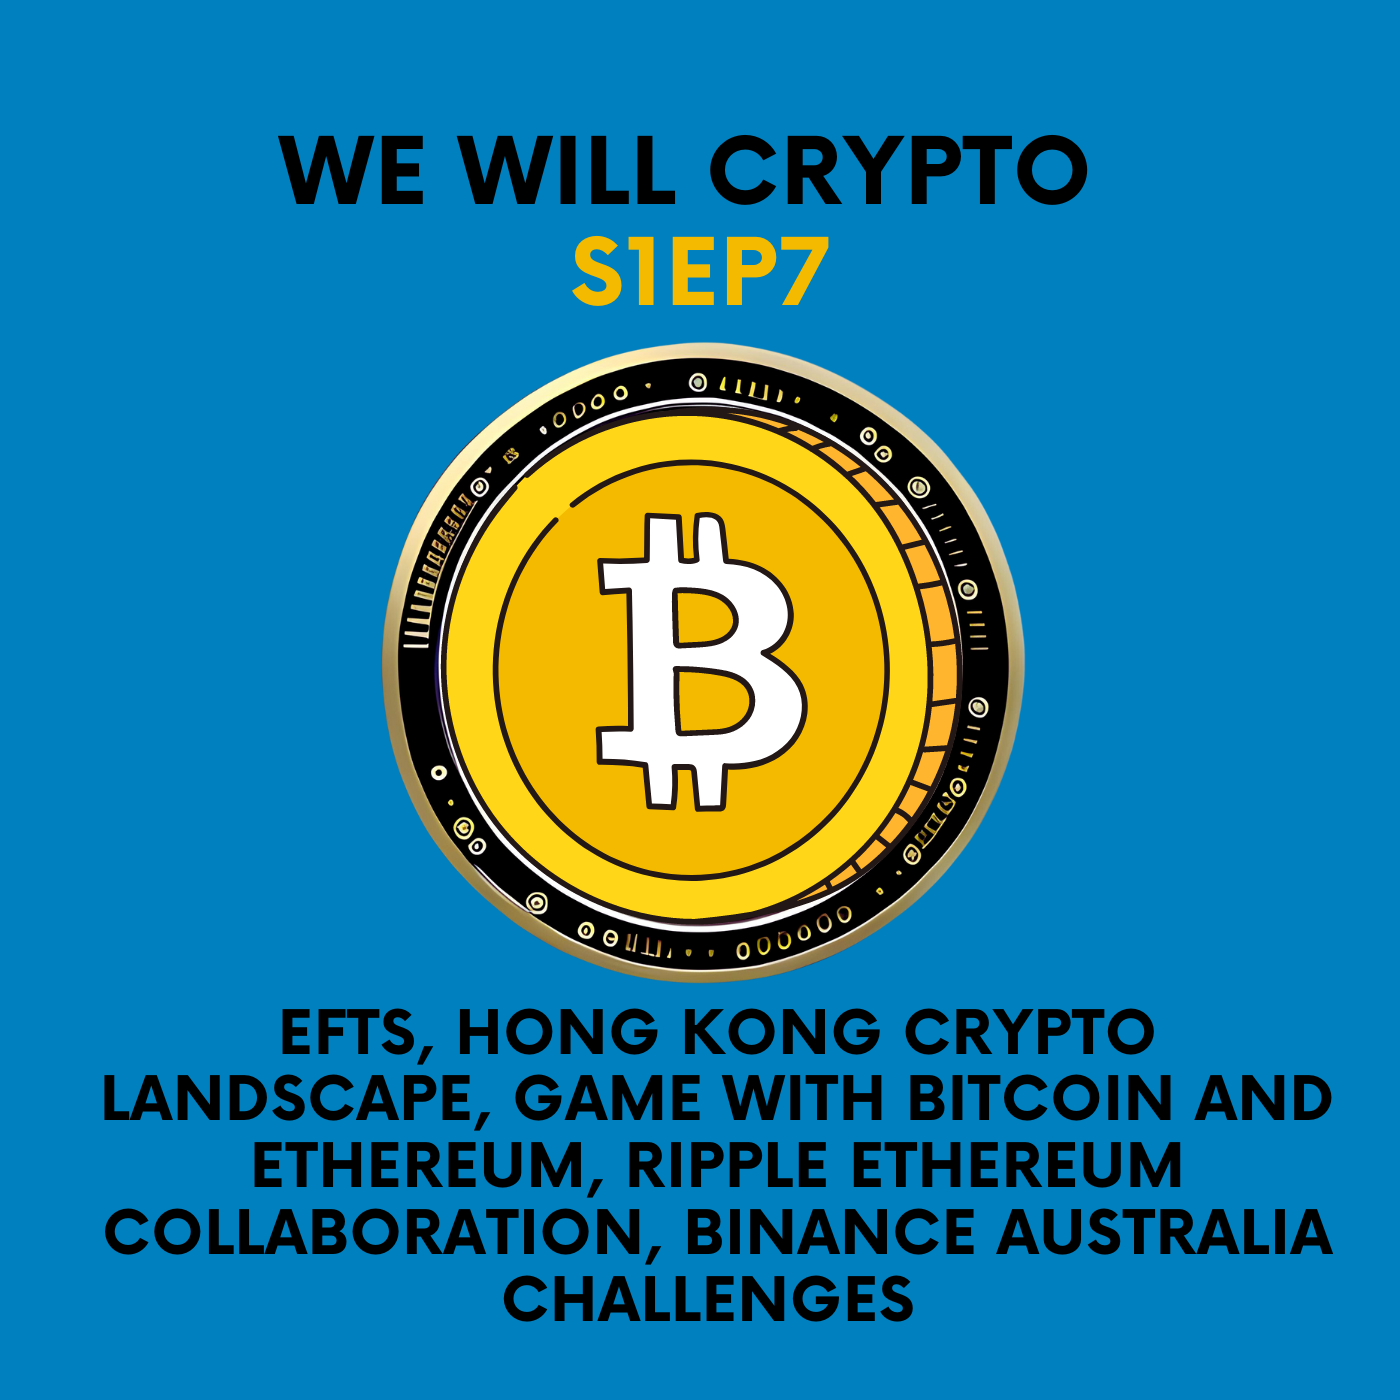 EFTs, Hong Kong Crypto Landscape, Game with Bitcoin and Ethereum, Ripple and Ethereum Collaboration, Binance Australia Challenges post thumbnail image